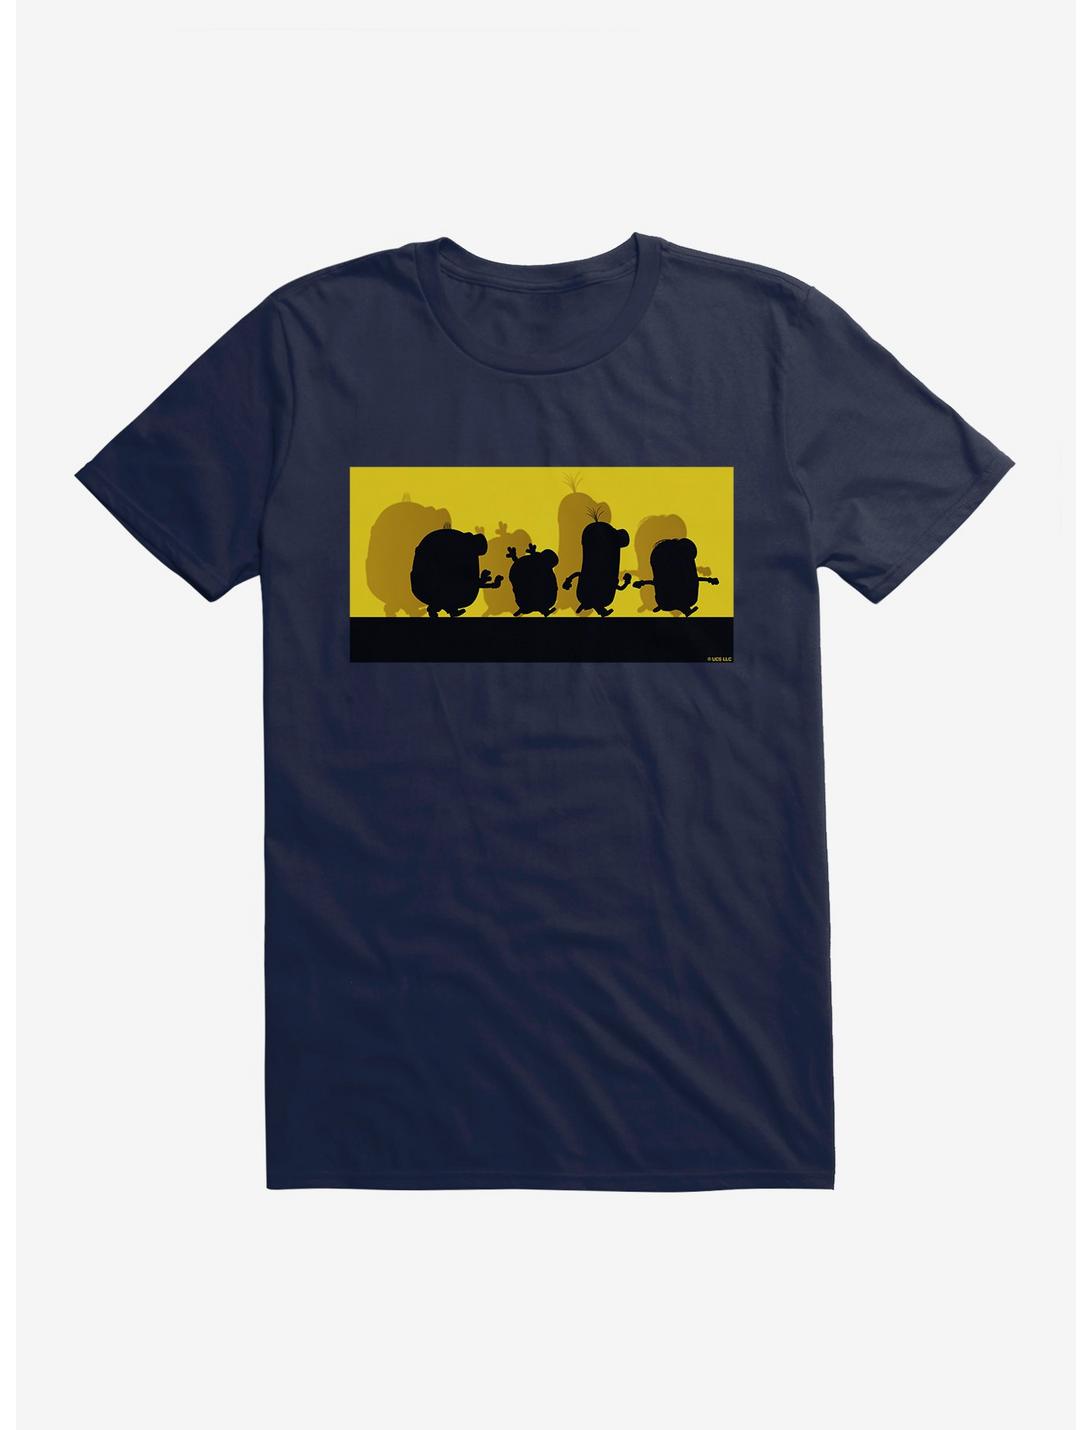 Minions Group Silhouette T-Shirt, MIDNIGHT NAVY, hi-res